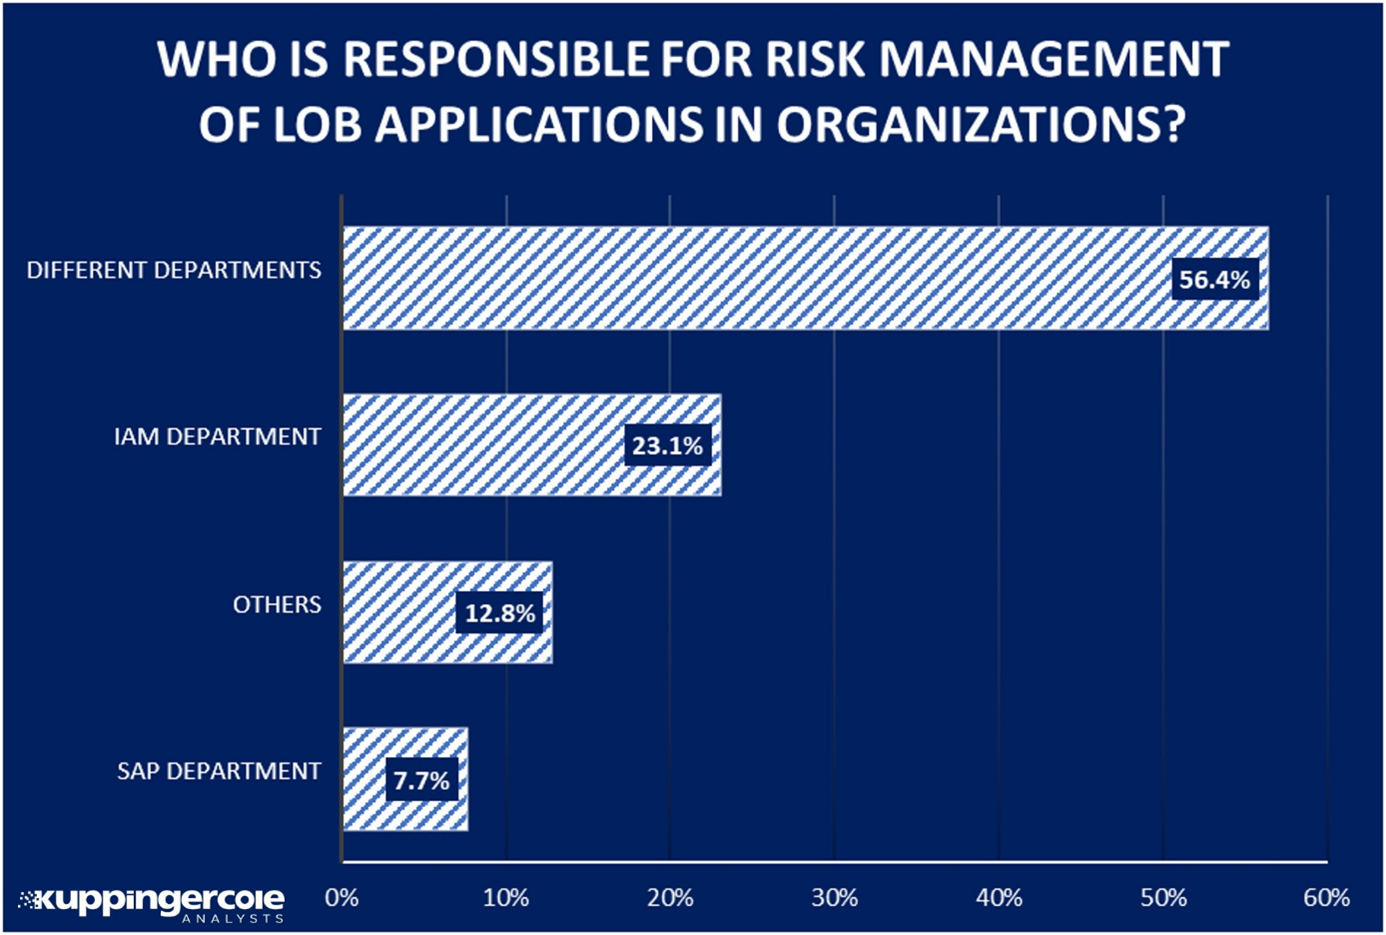 Risk Management and Security are still not handled consistently in organizations